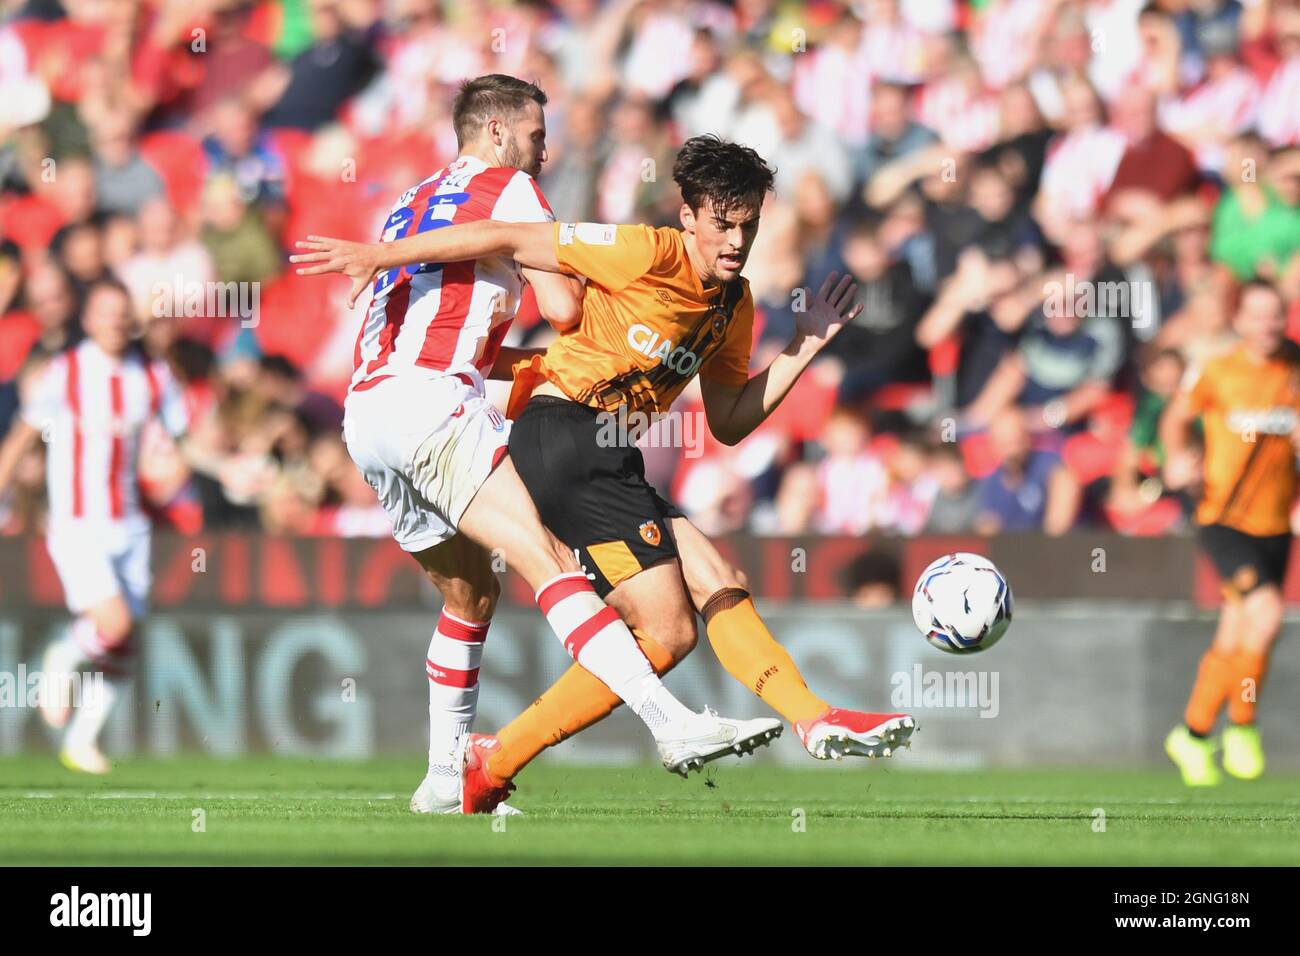 Hull City's Jordy de Wijs (right) is tackled by Stoke City's Nick Powell during the Sky Bet Championship match at the bet365 Stadium, Stoke. Picture date: Saturday September 25, 2021. Stock Photo